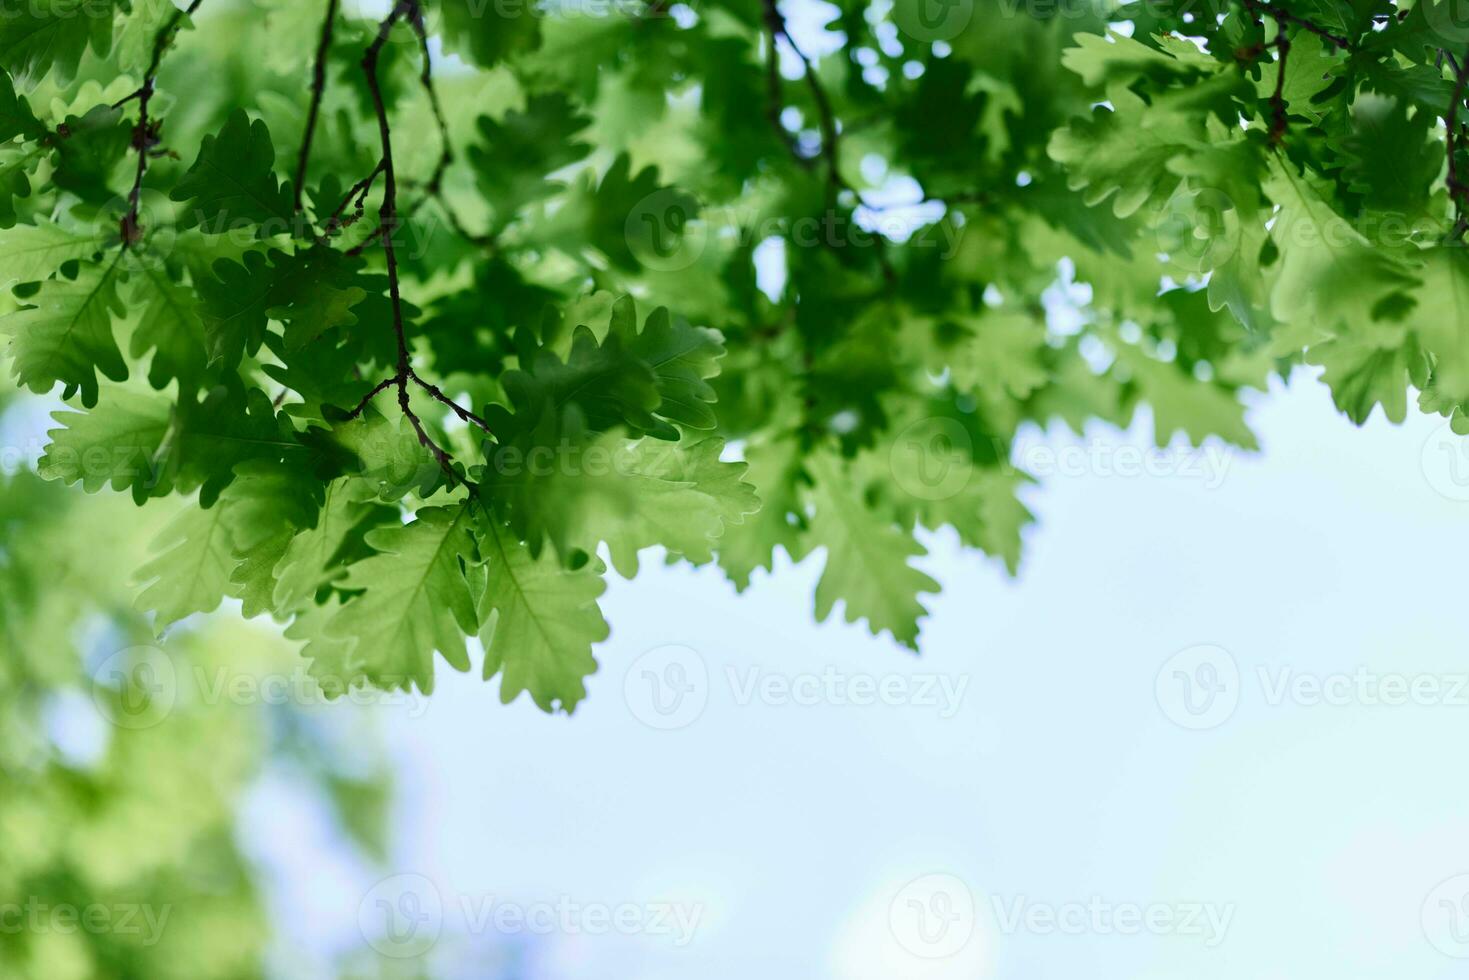 The green leaves of the oak tree close-up against the sky in the sunlight in the forest photo